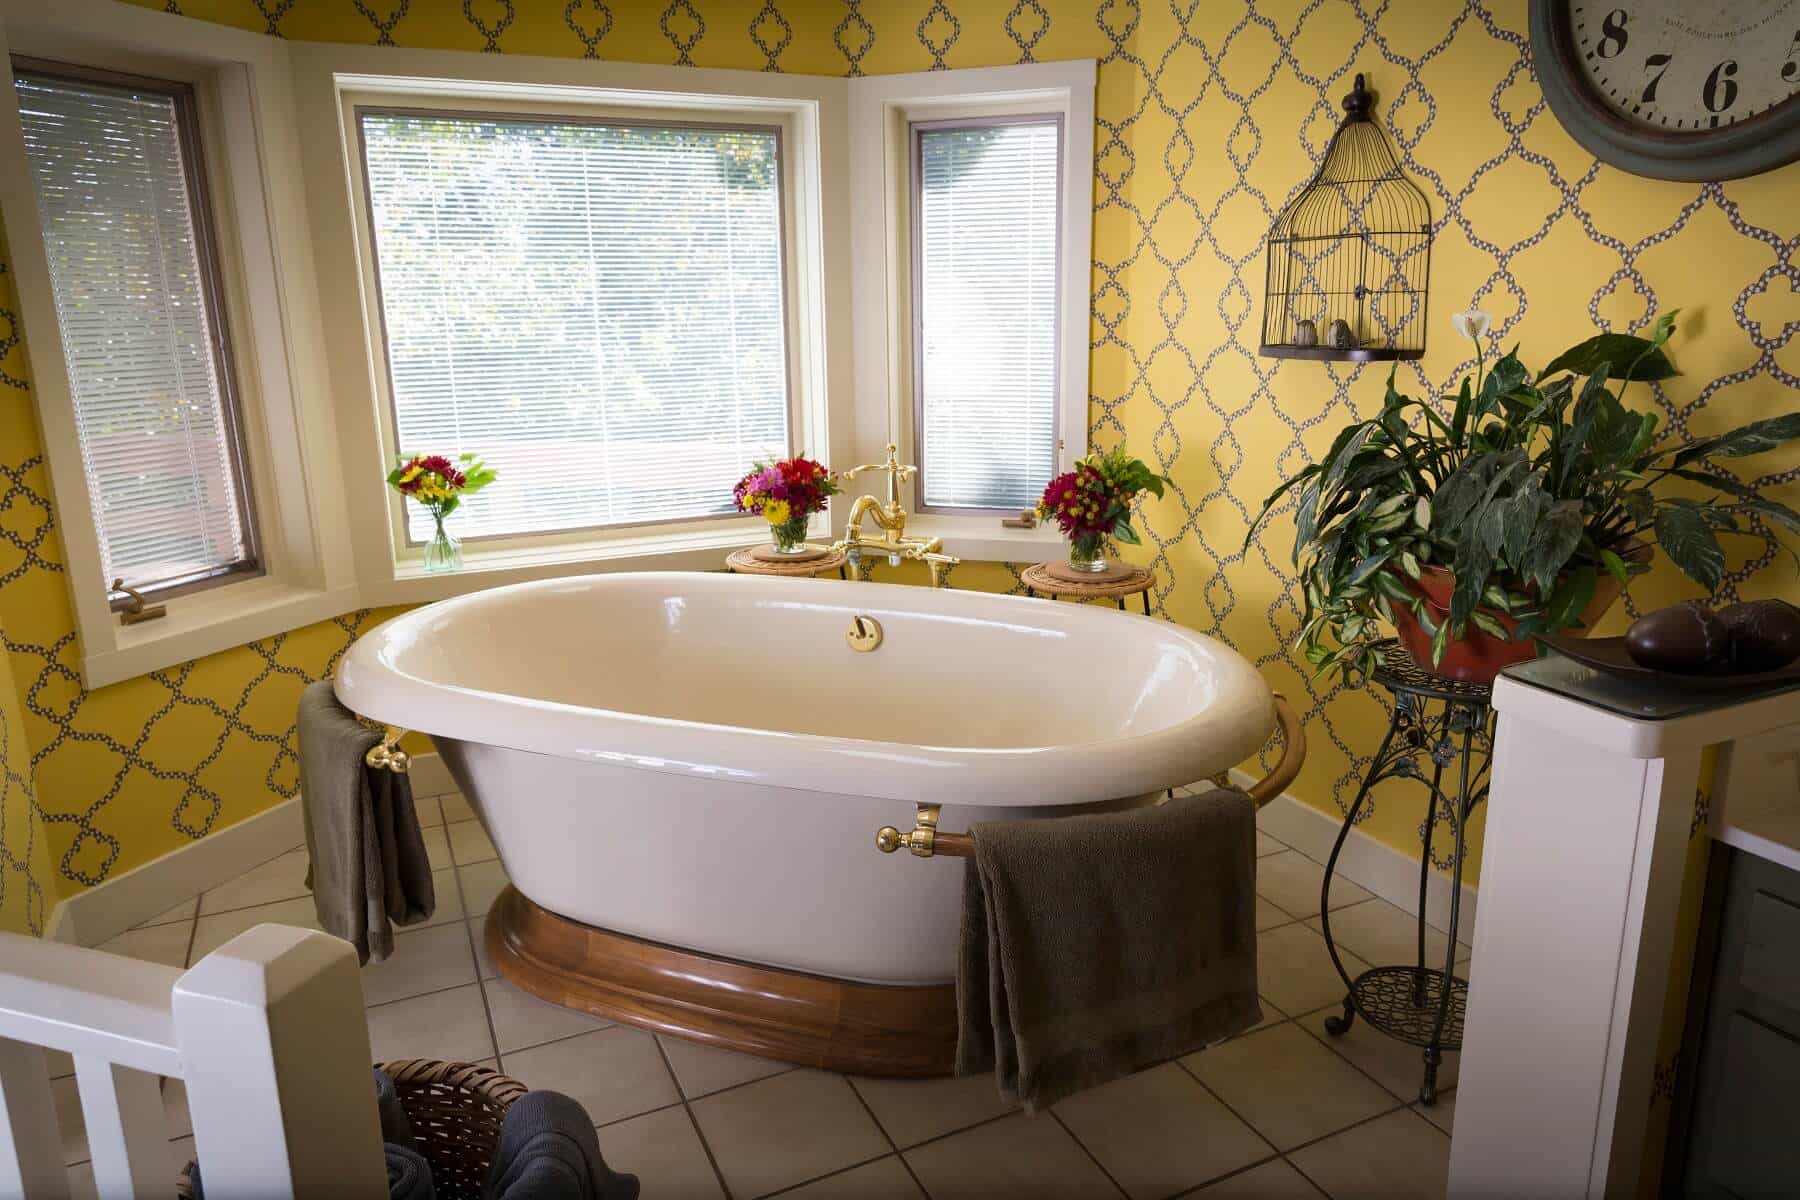  Enjoy a long, relaxing bathin the oversize roman soaking tub in the Sunrise Suite at Country Willows Inn & Estate in Ashland, Oregon, with views of the trees and mountainside. 